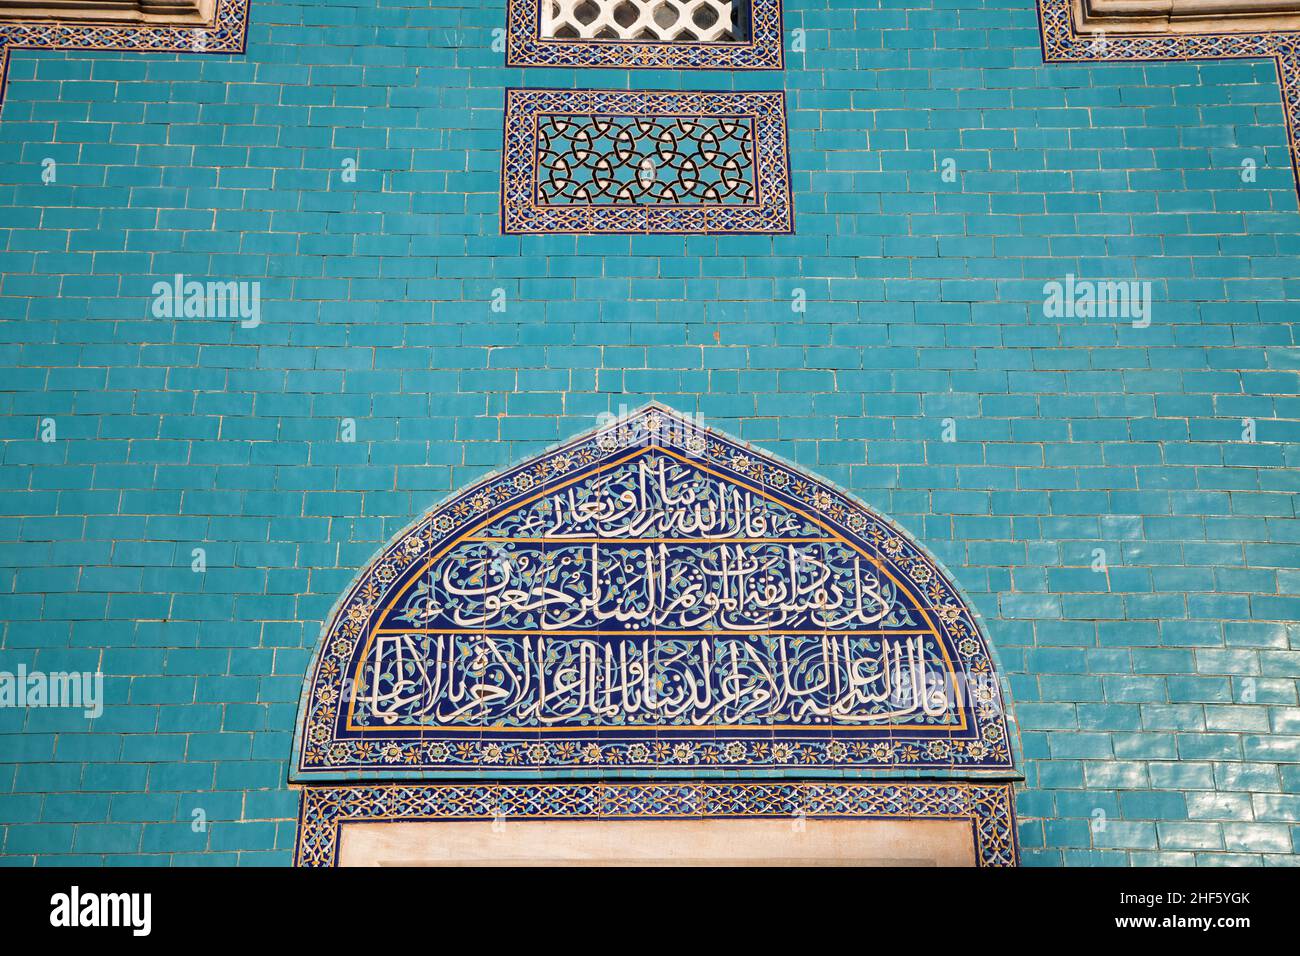 Green tomb with iznik pottery or tiles covered tomb wall. Stock Photo